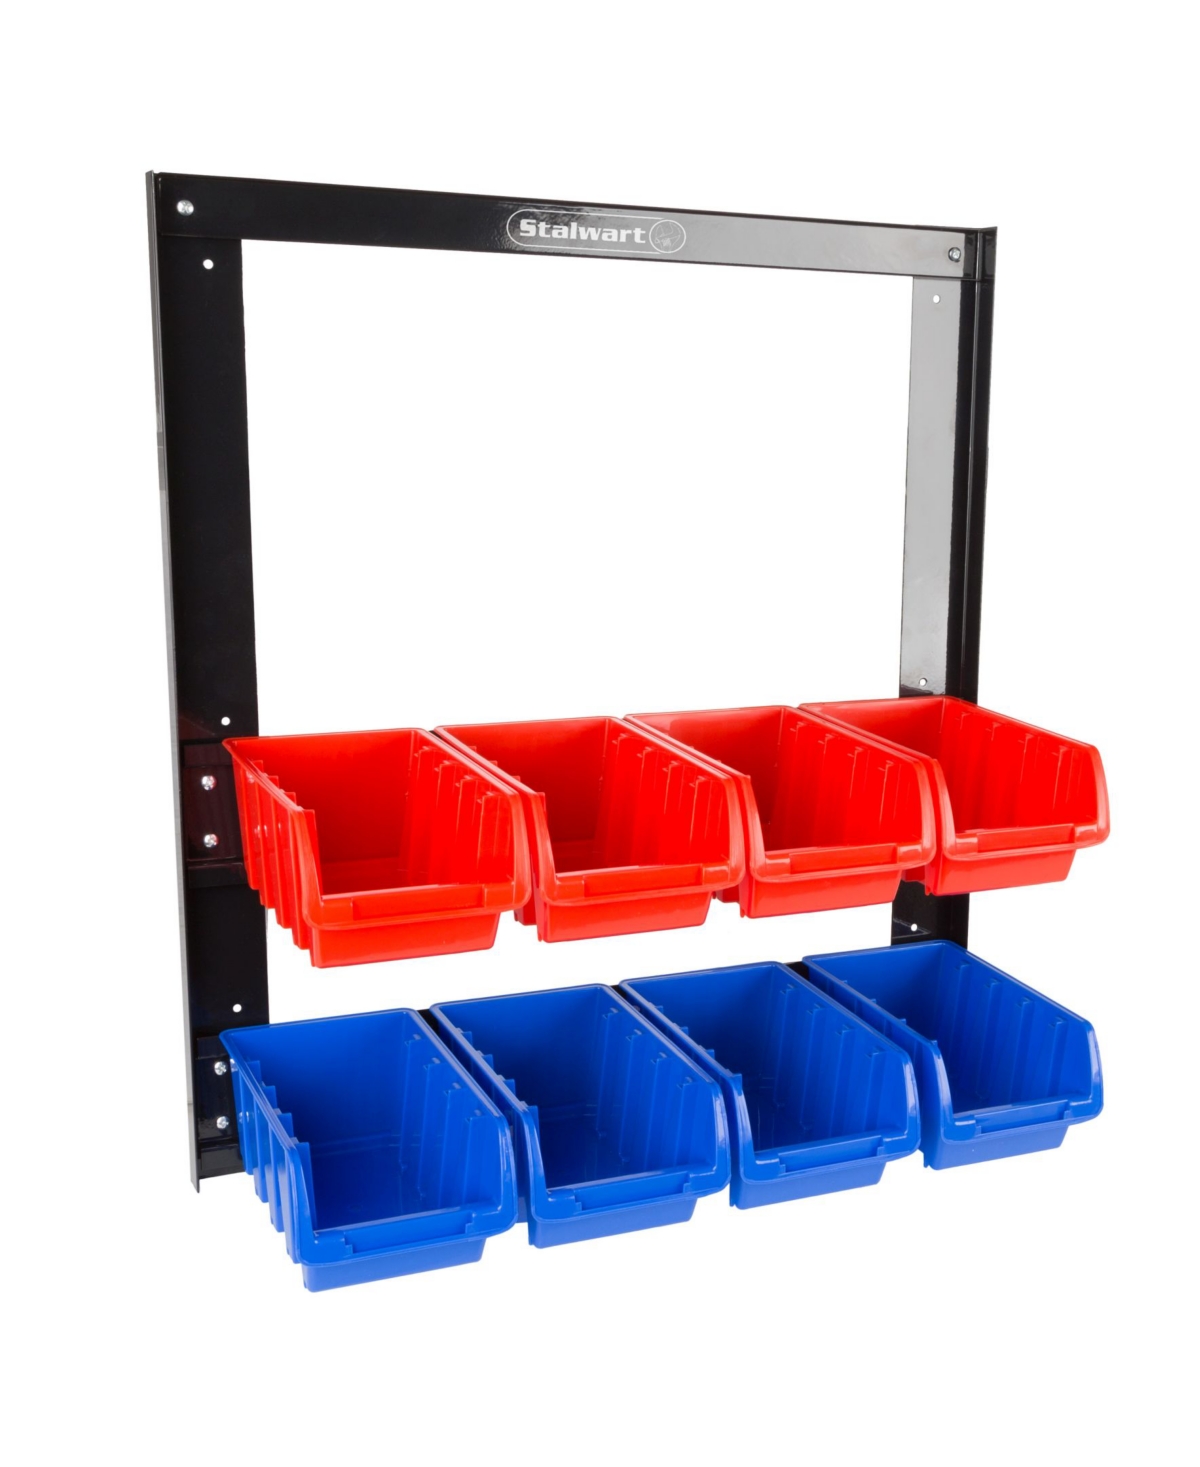 8 Bin Storage Rack organizer - Wall Mountable Container with Removable Drawers by Stalwart